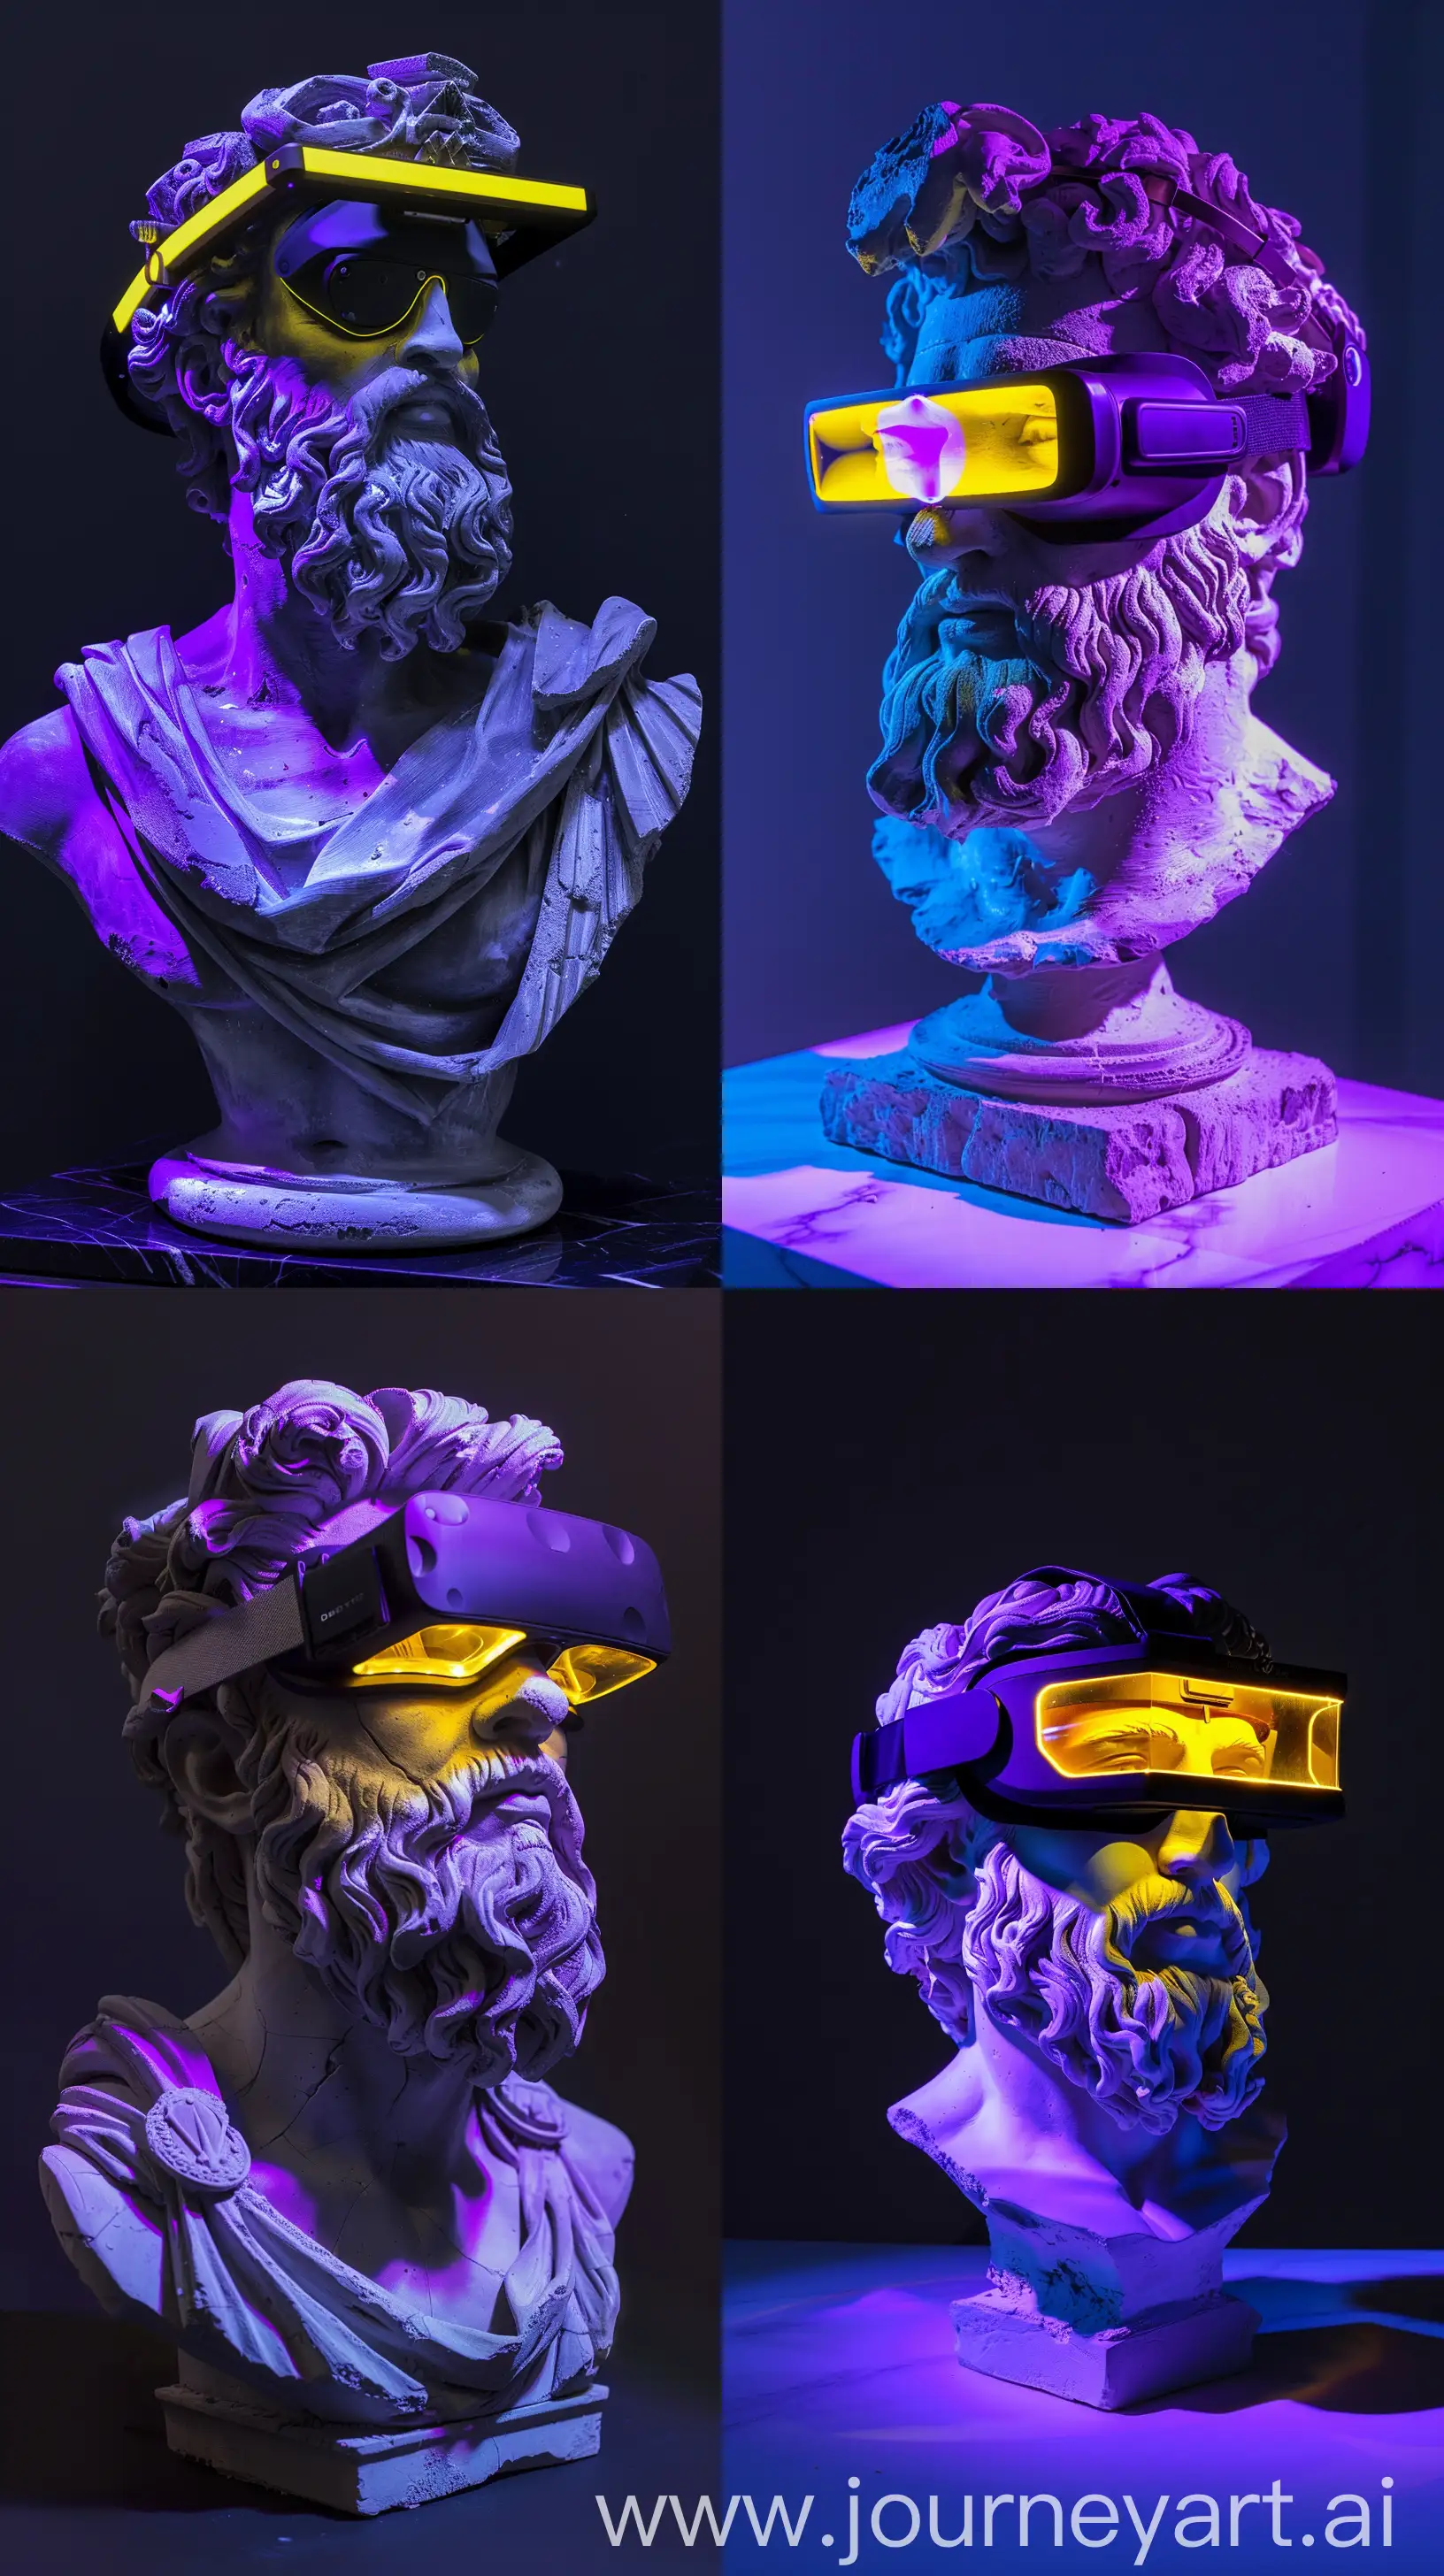 Zeus-Plaster-Sculpture-with-Black-VR-Glasses-and-Purple-Light-Reflections